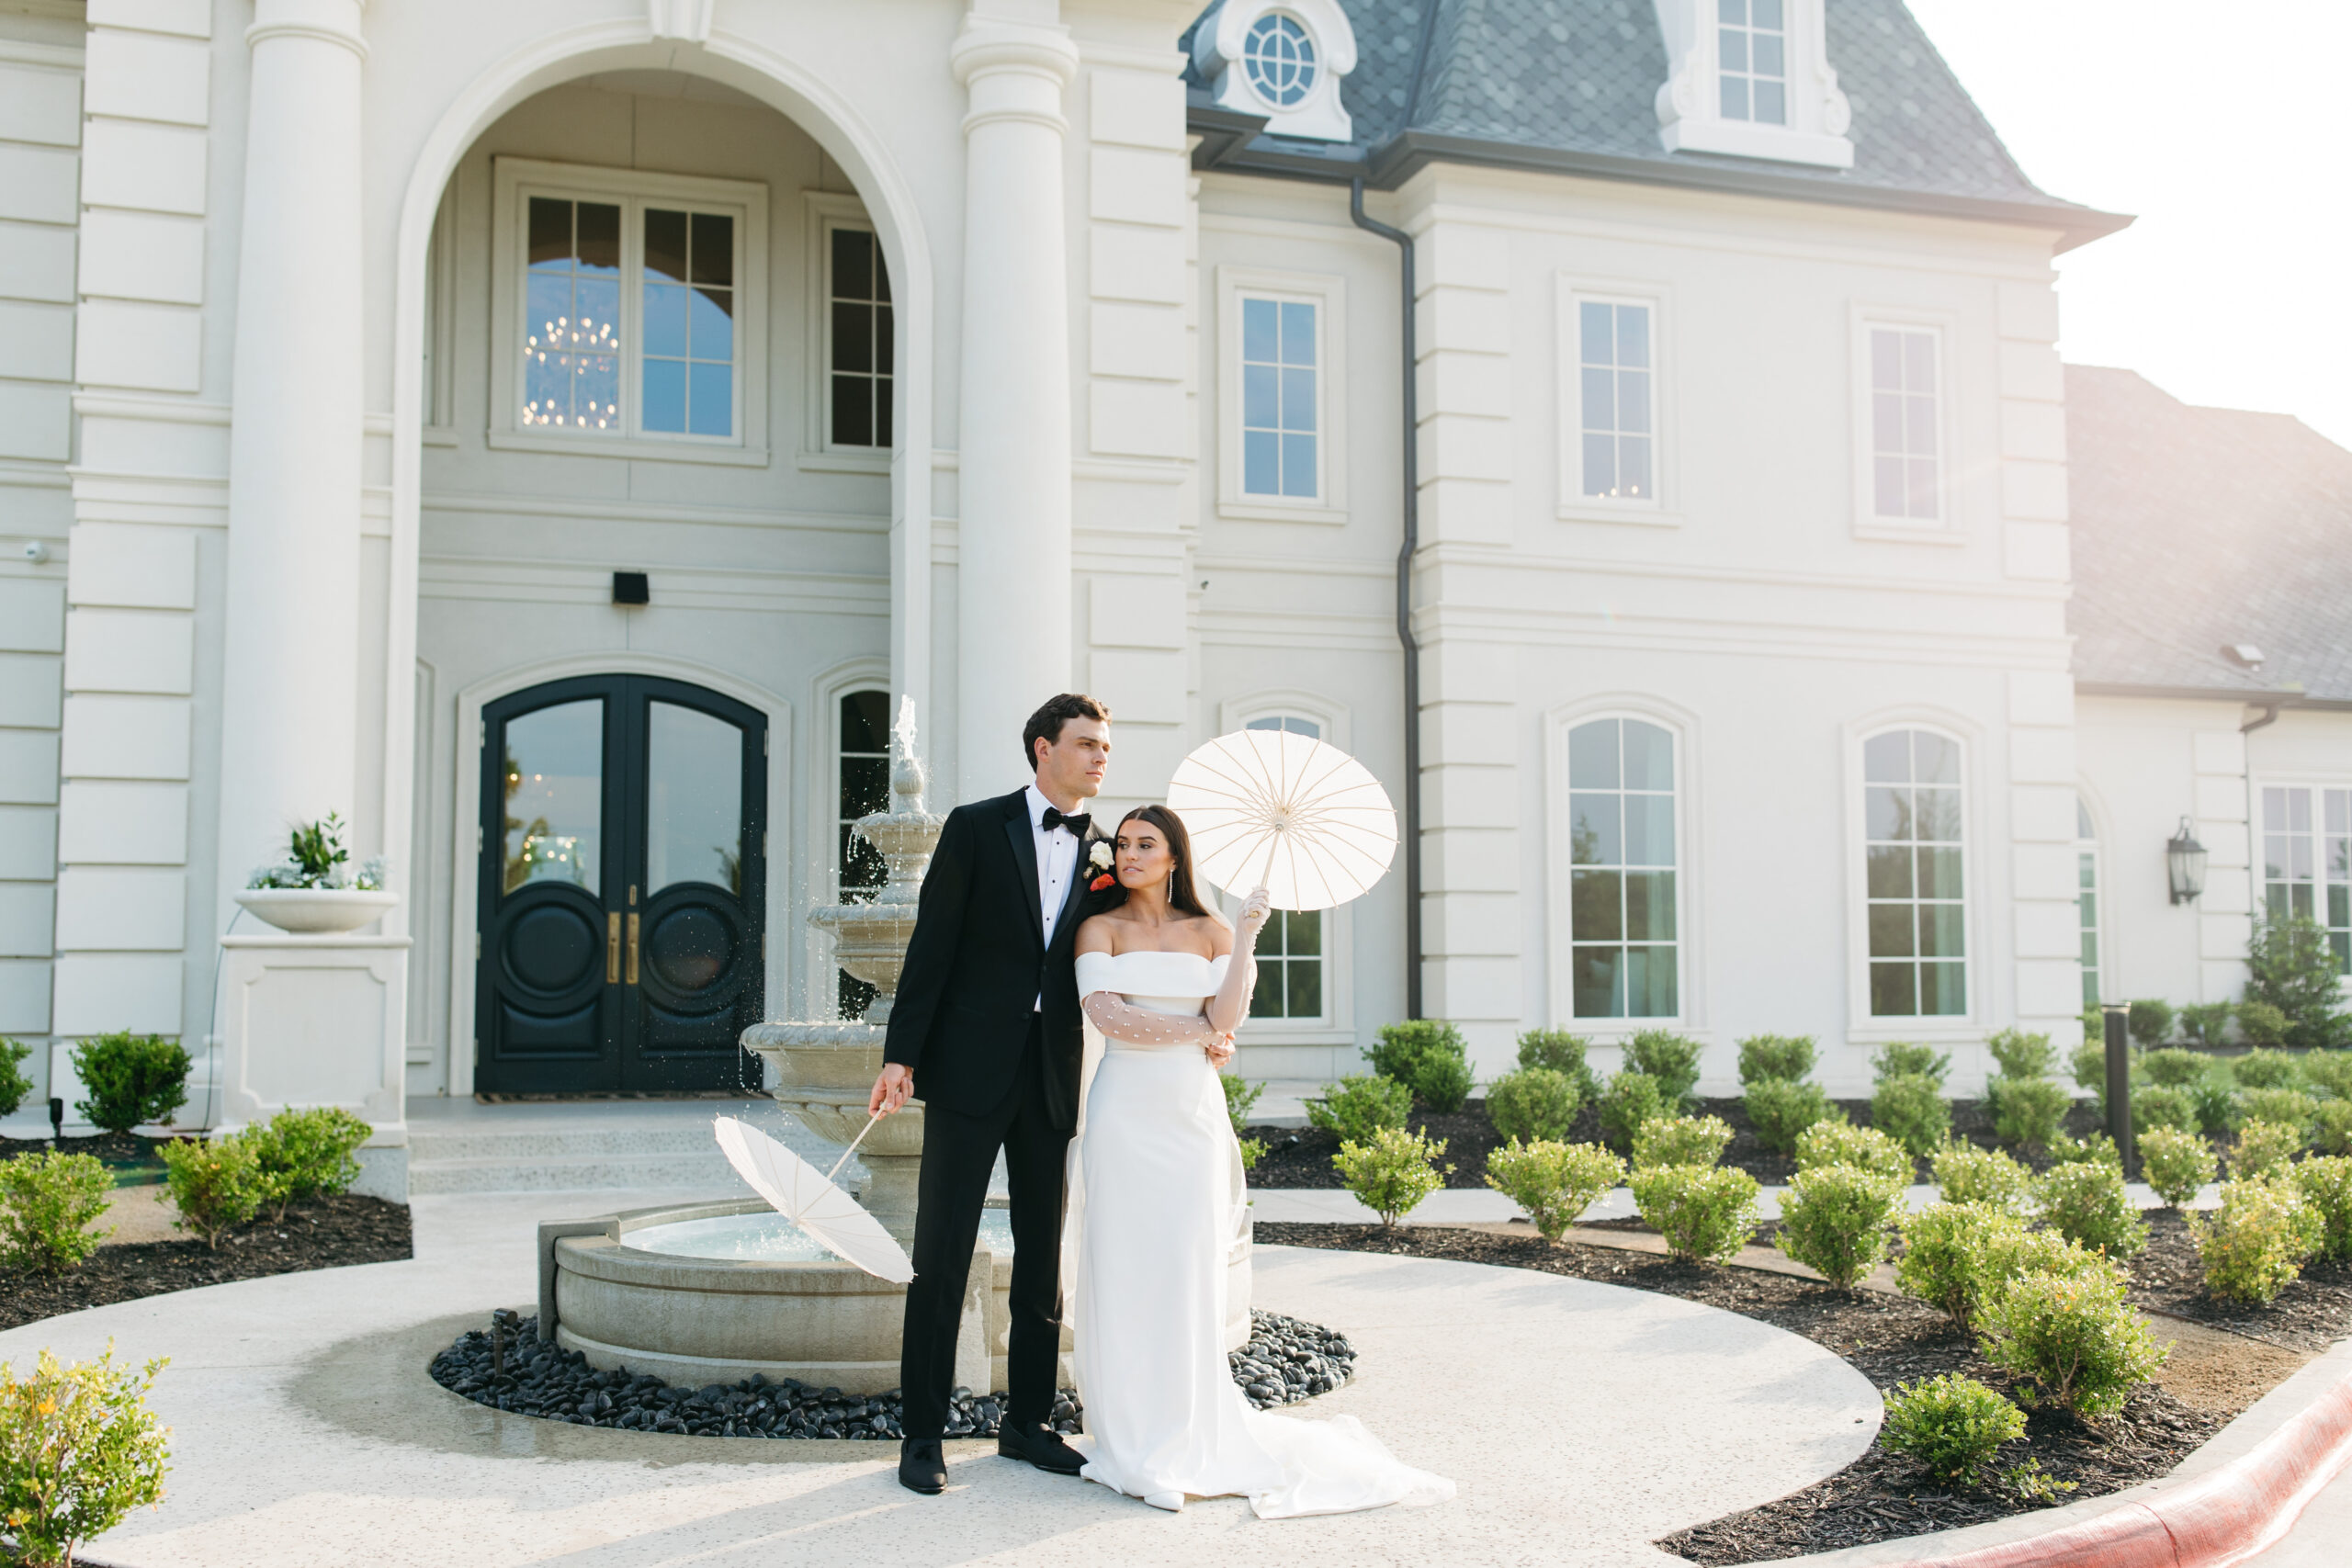 A Black Tie Garden Party Wedding in Dallas, TX - Set against the picturesque backdrop of the Hillside Estate near Dallas, TX, Alec and Kayla's wedding was a celebration of love, life, and the promise of forever.